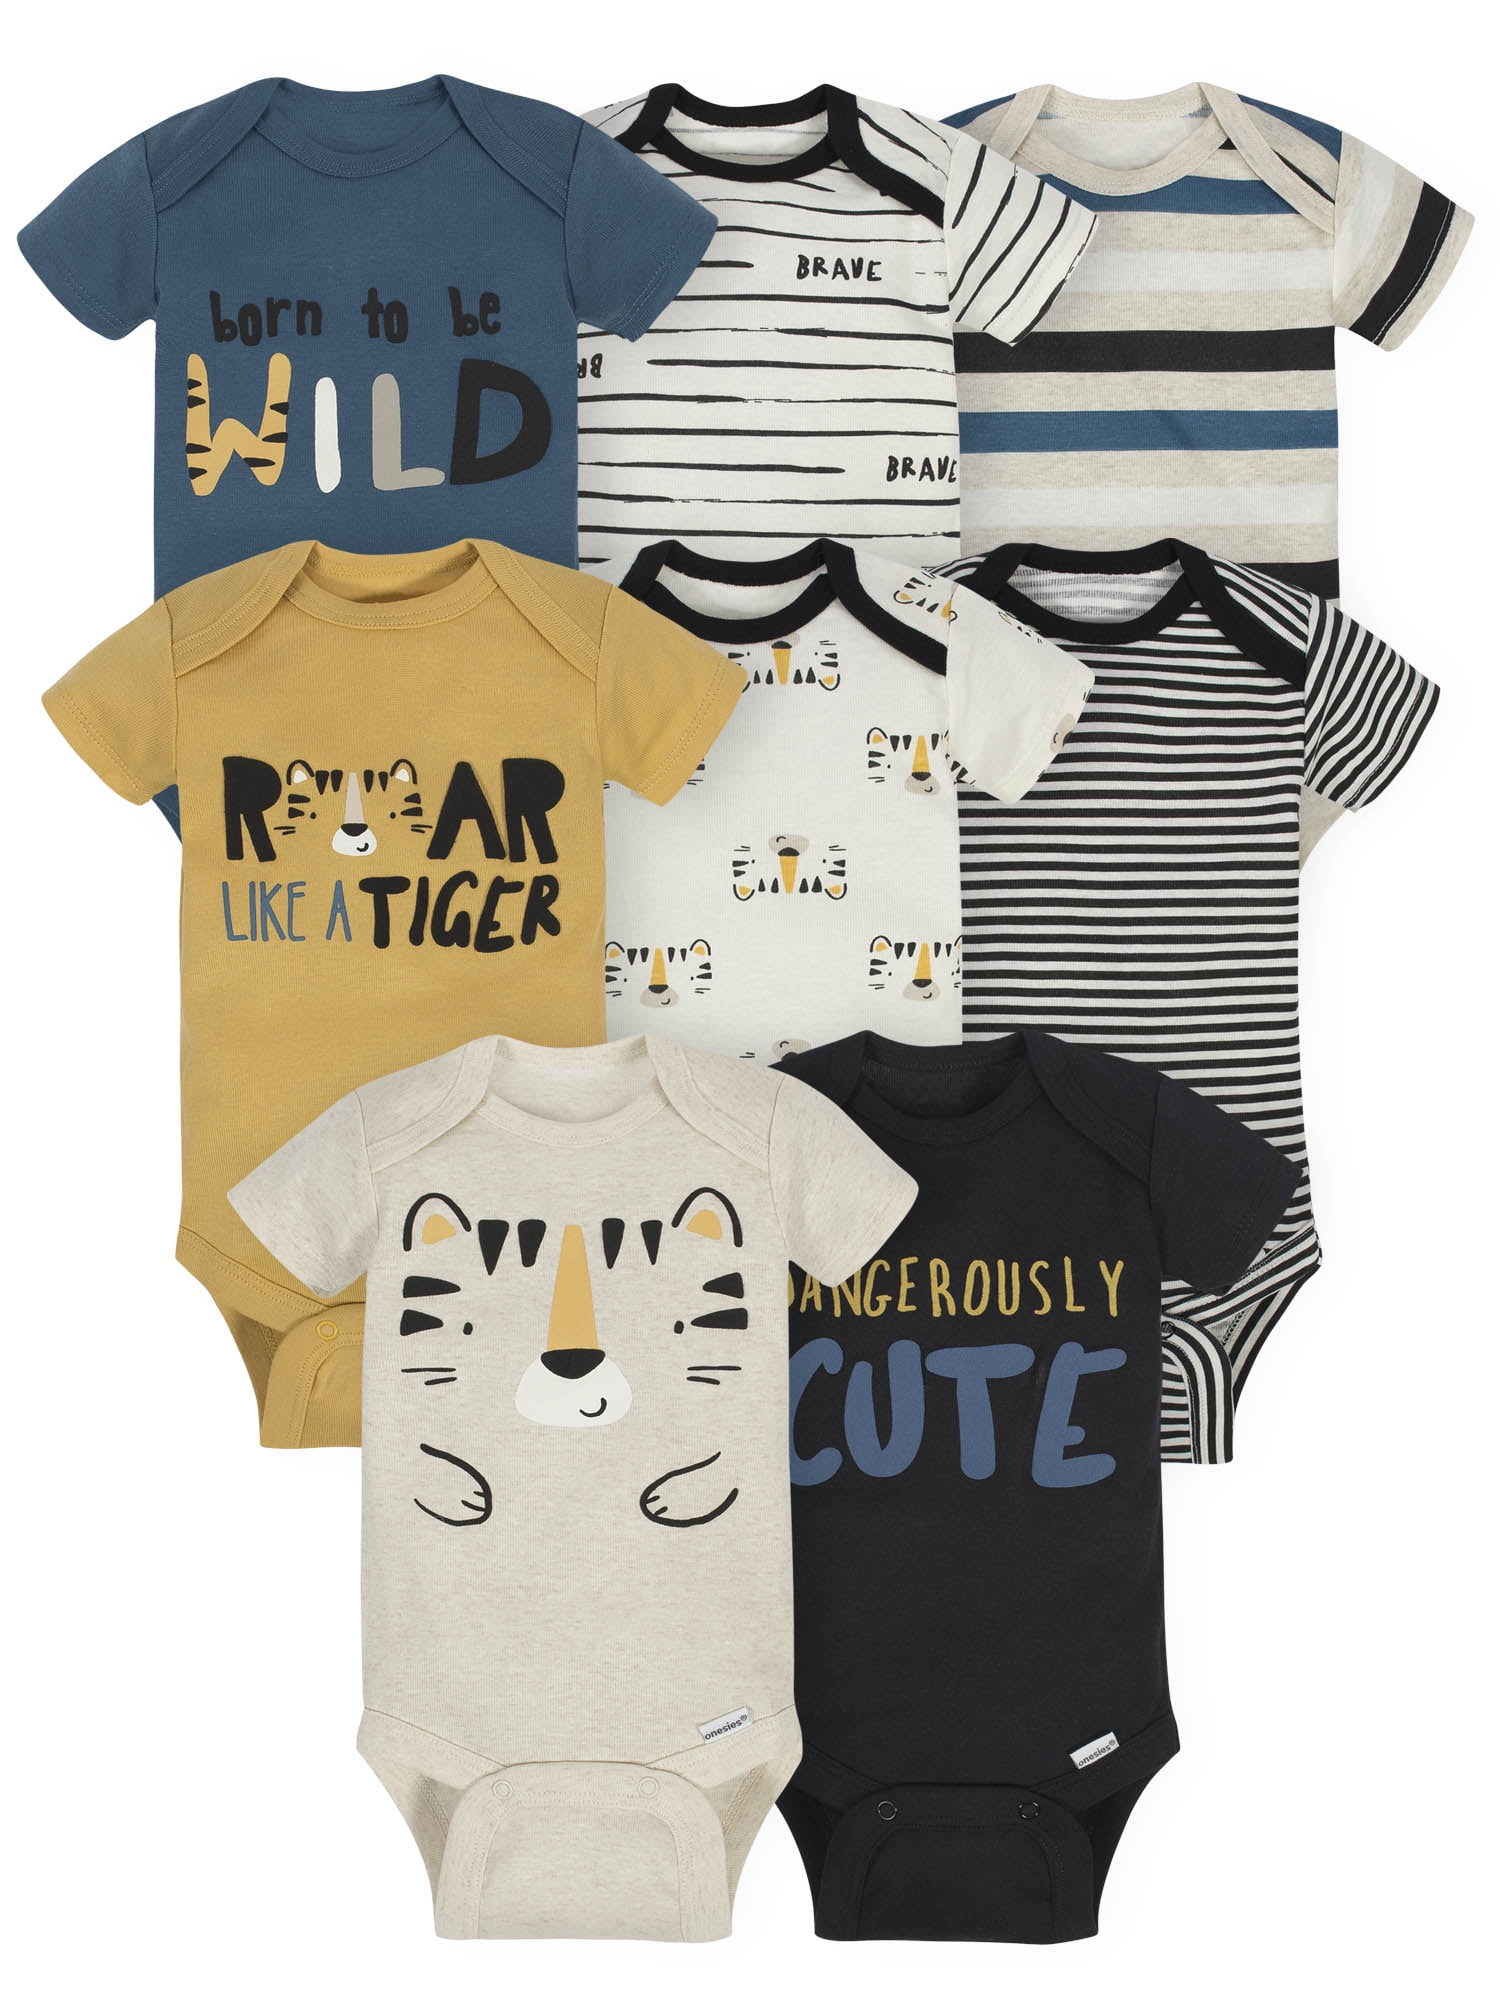 Toddler Baby Boys Bodysuit Short-Sleeve Onesie Use Your Head Print Outfit Summer Pajamas